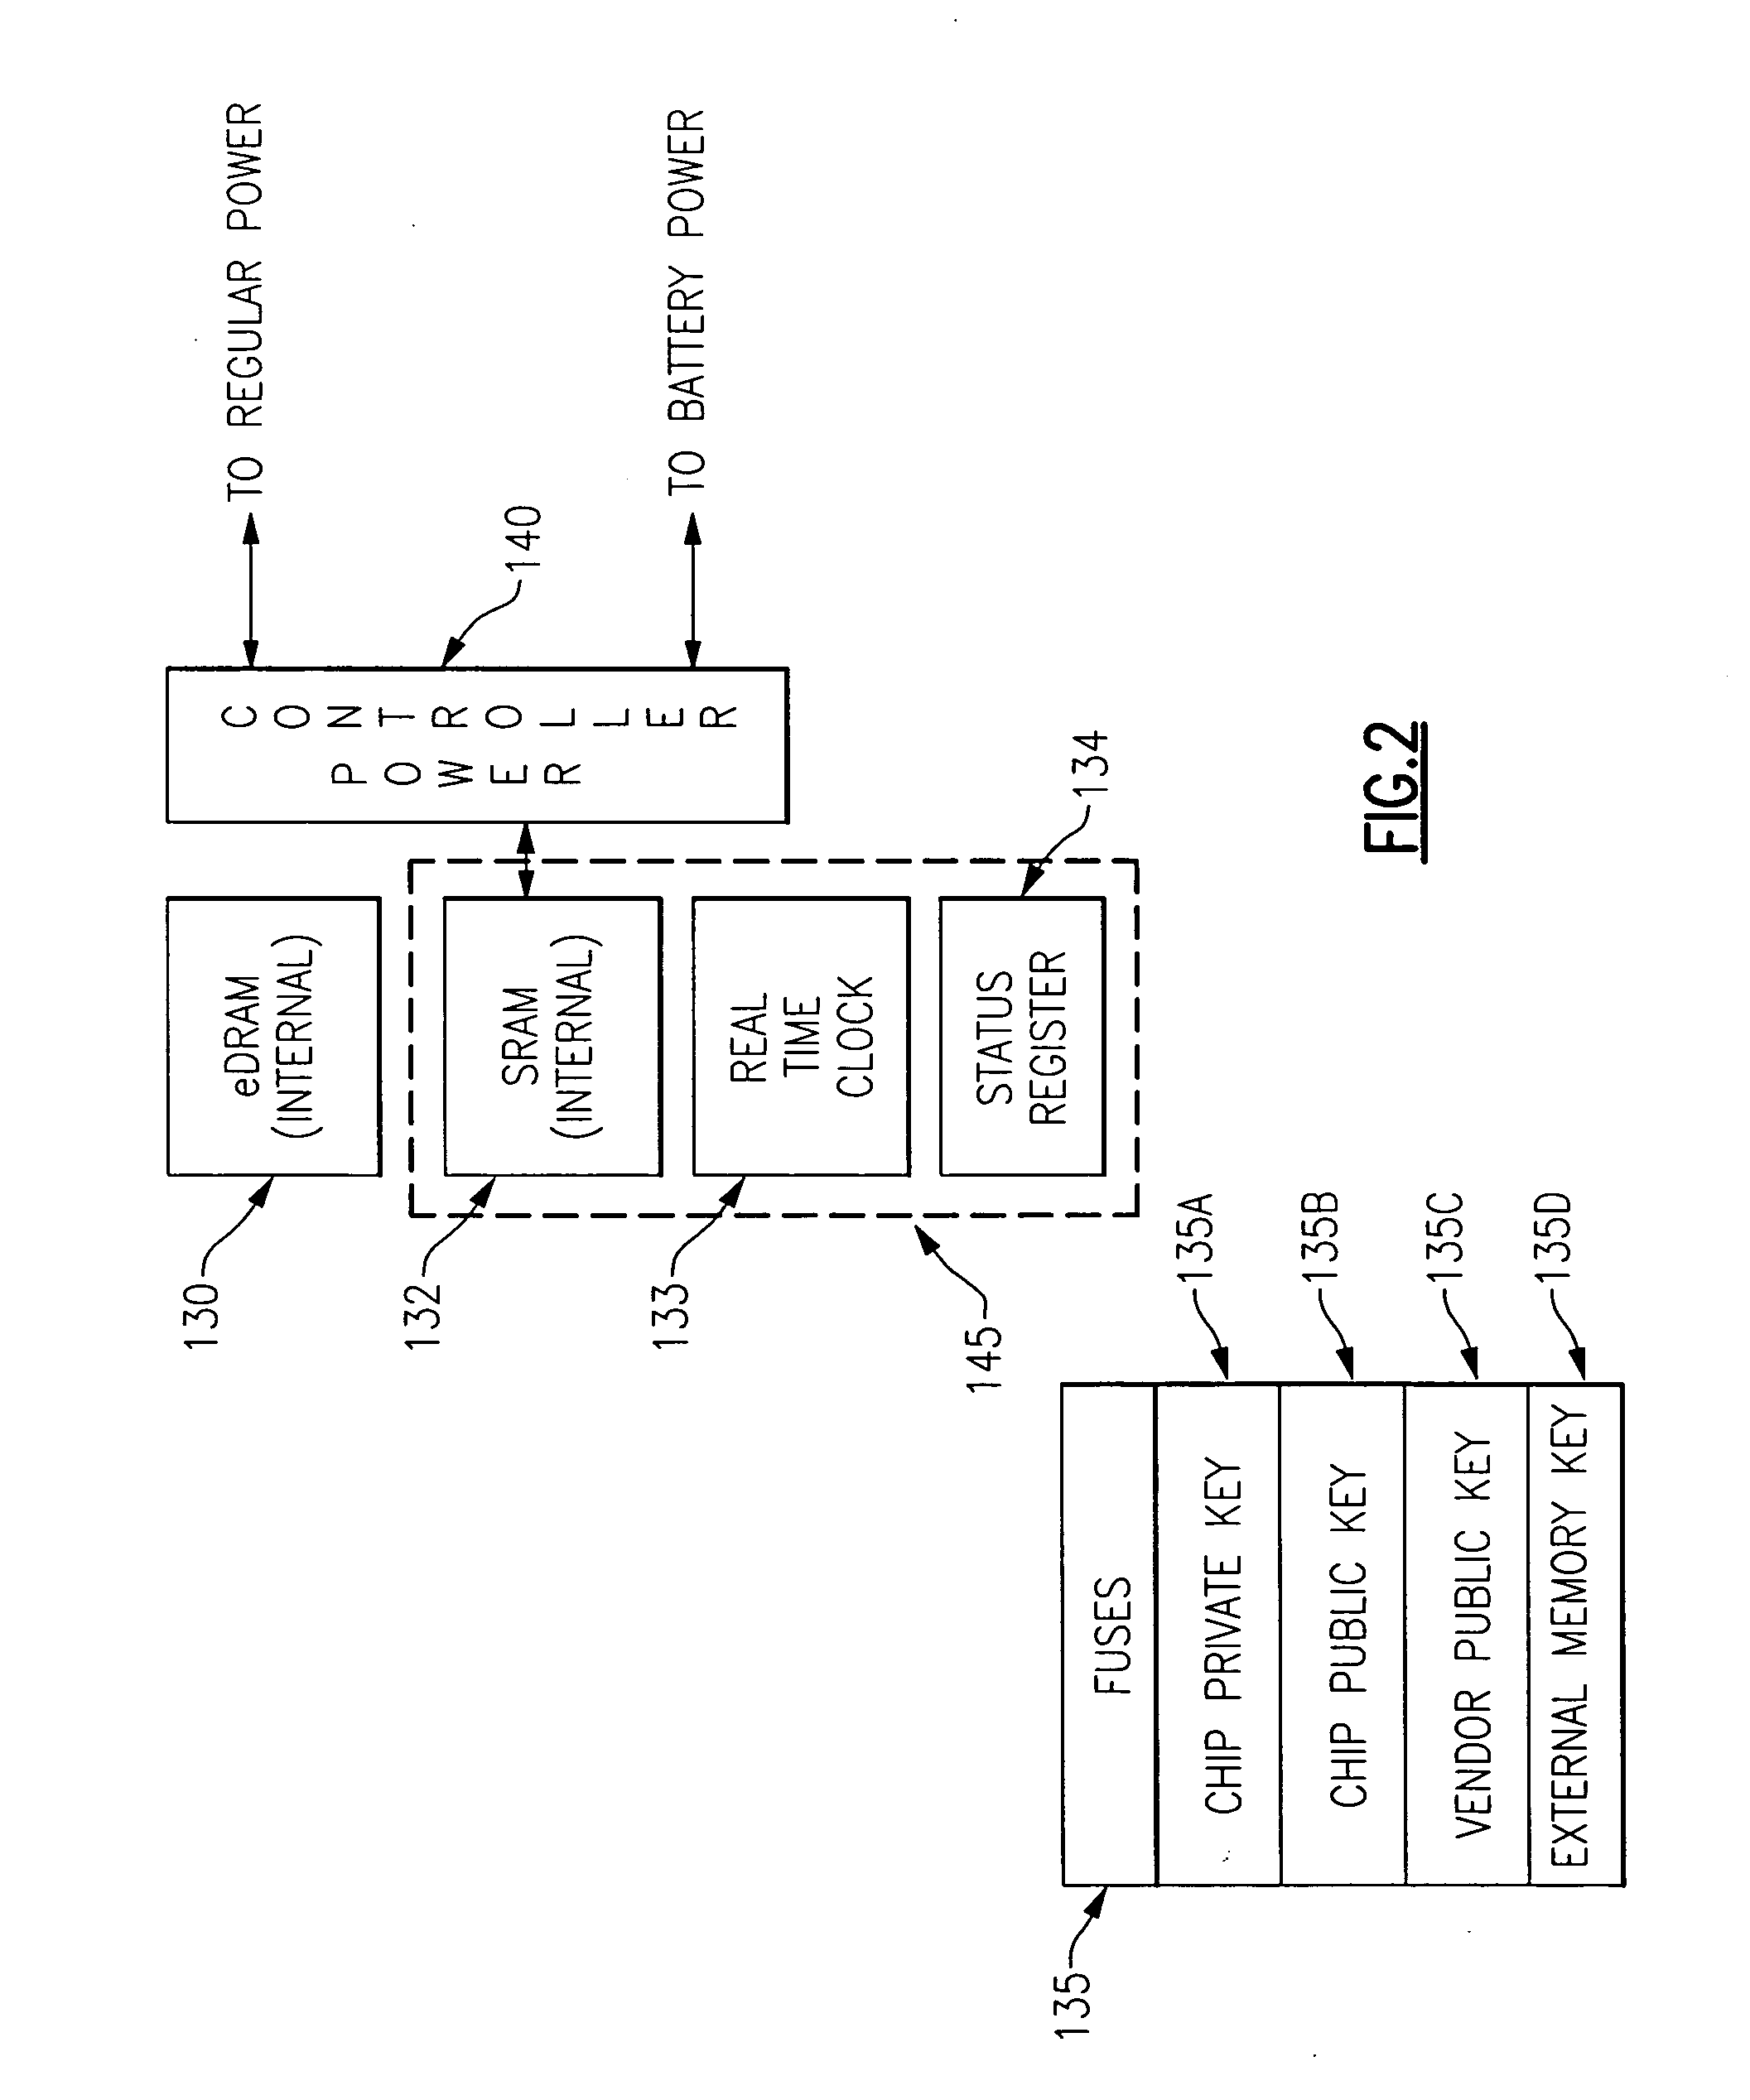 Integrated circuit chip for encryption and decryption using instructions supplied through a secure interface